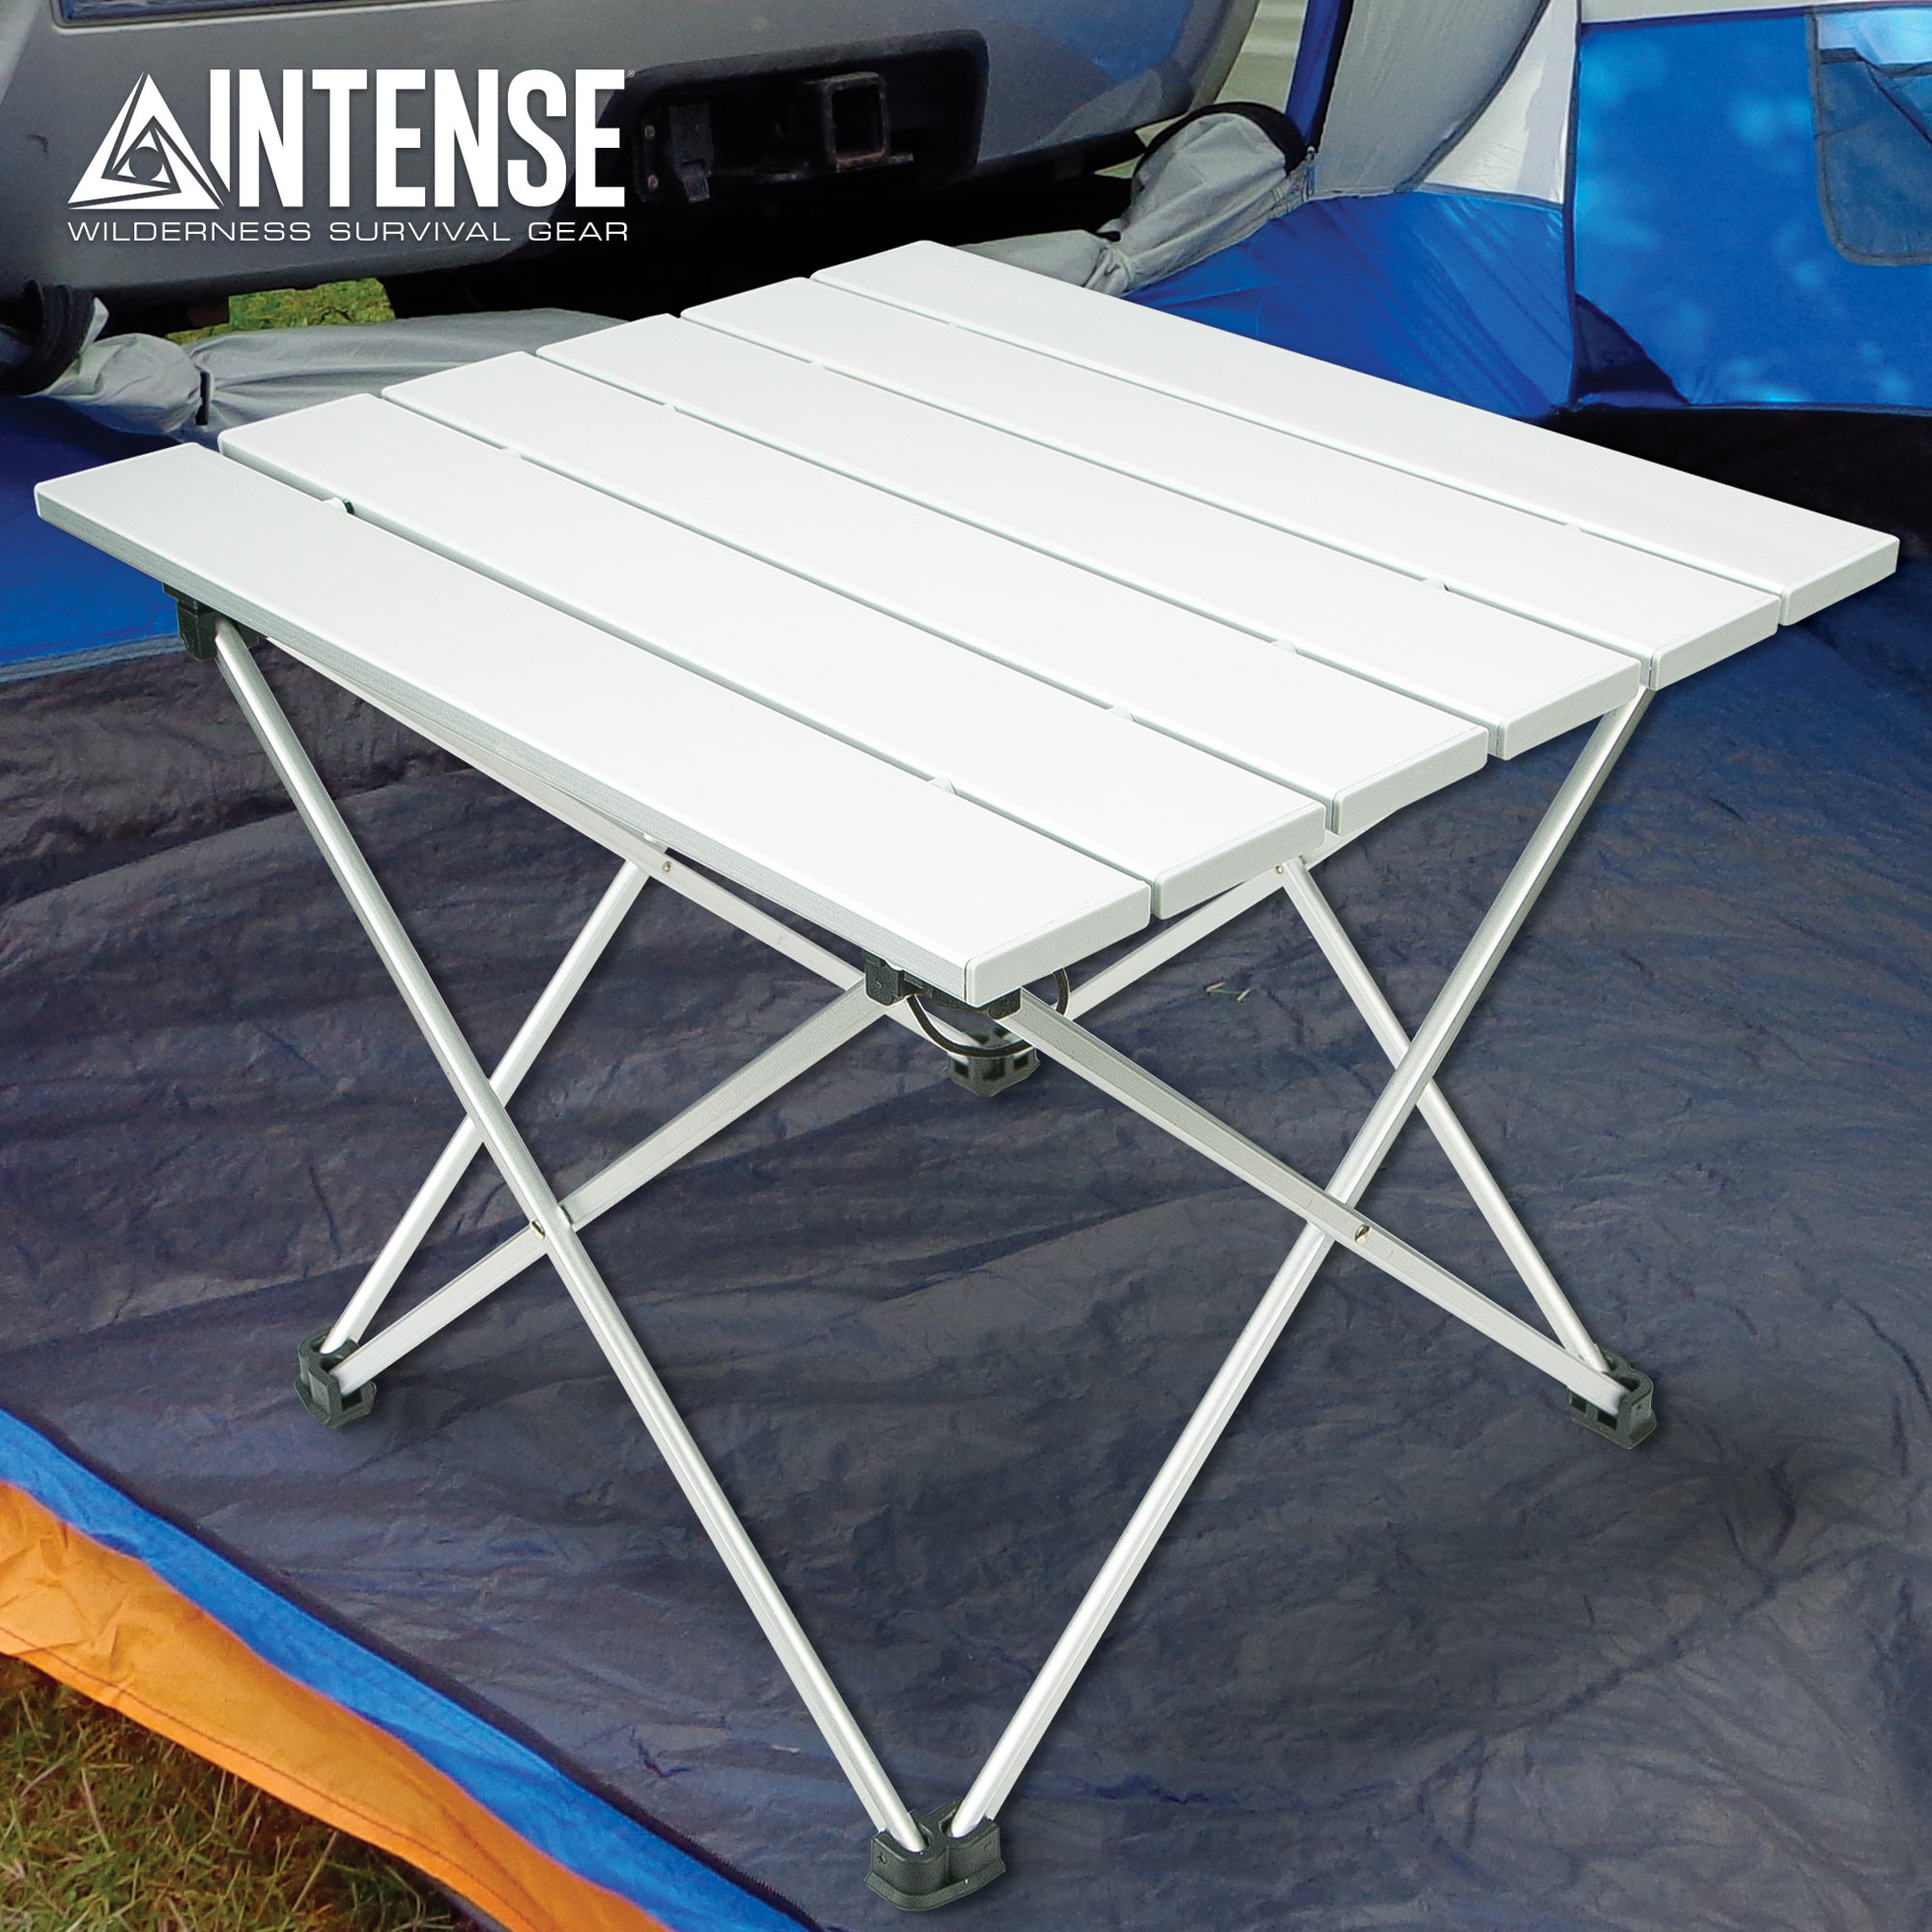 Intense Ultra-Light Folding Camping Table With Bag - 6061 Aluminum And TPU Construction - Dimensions 15 1/2x 13 1/4x 12 1/4